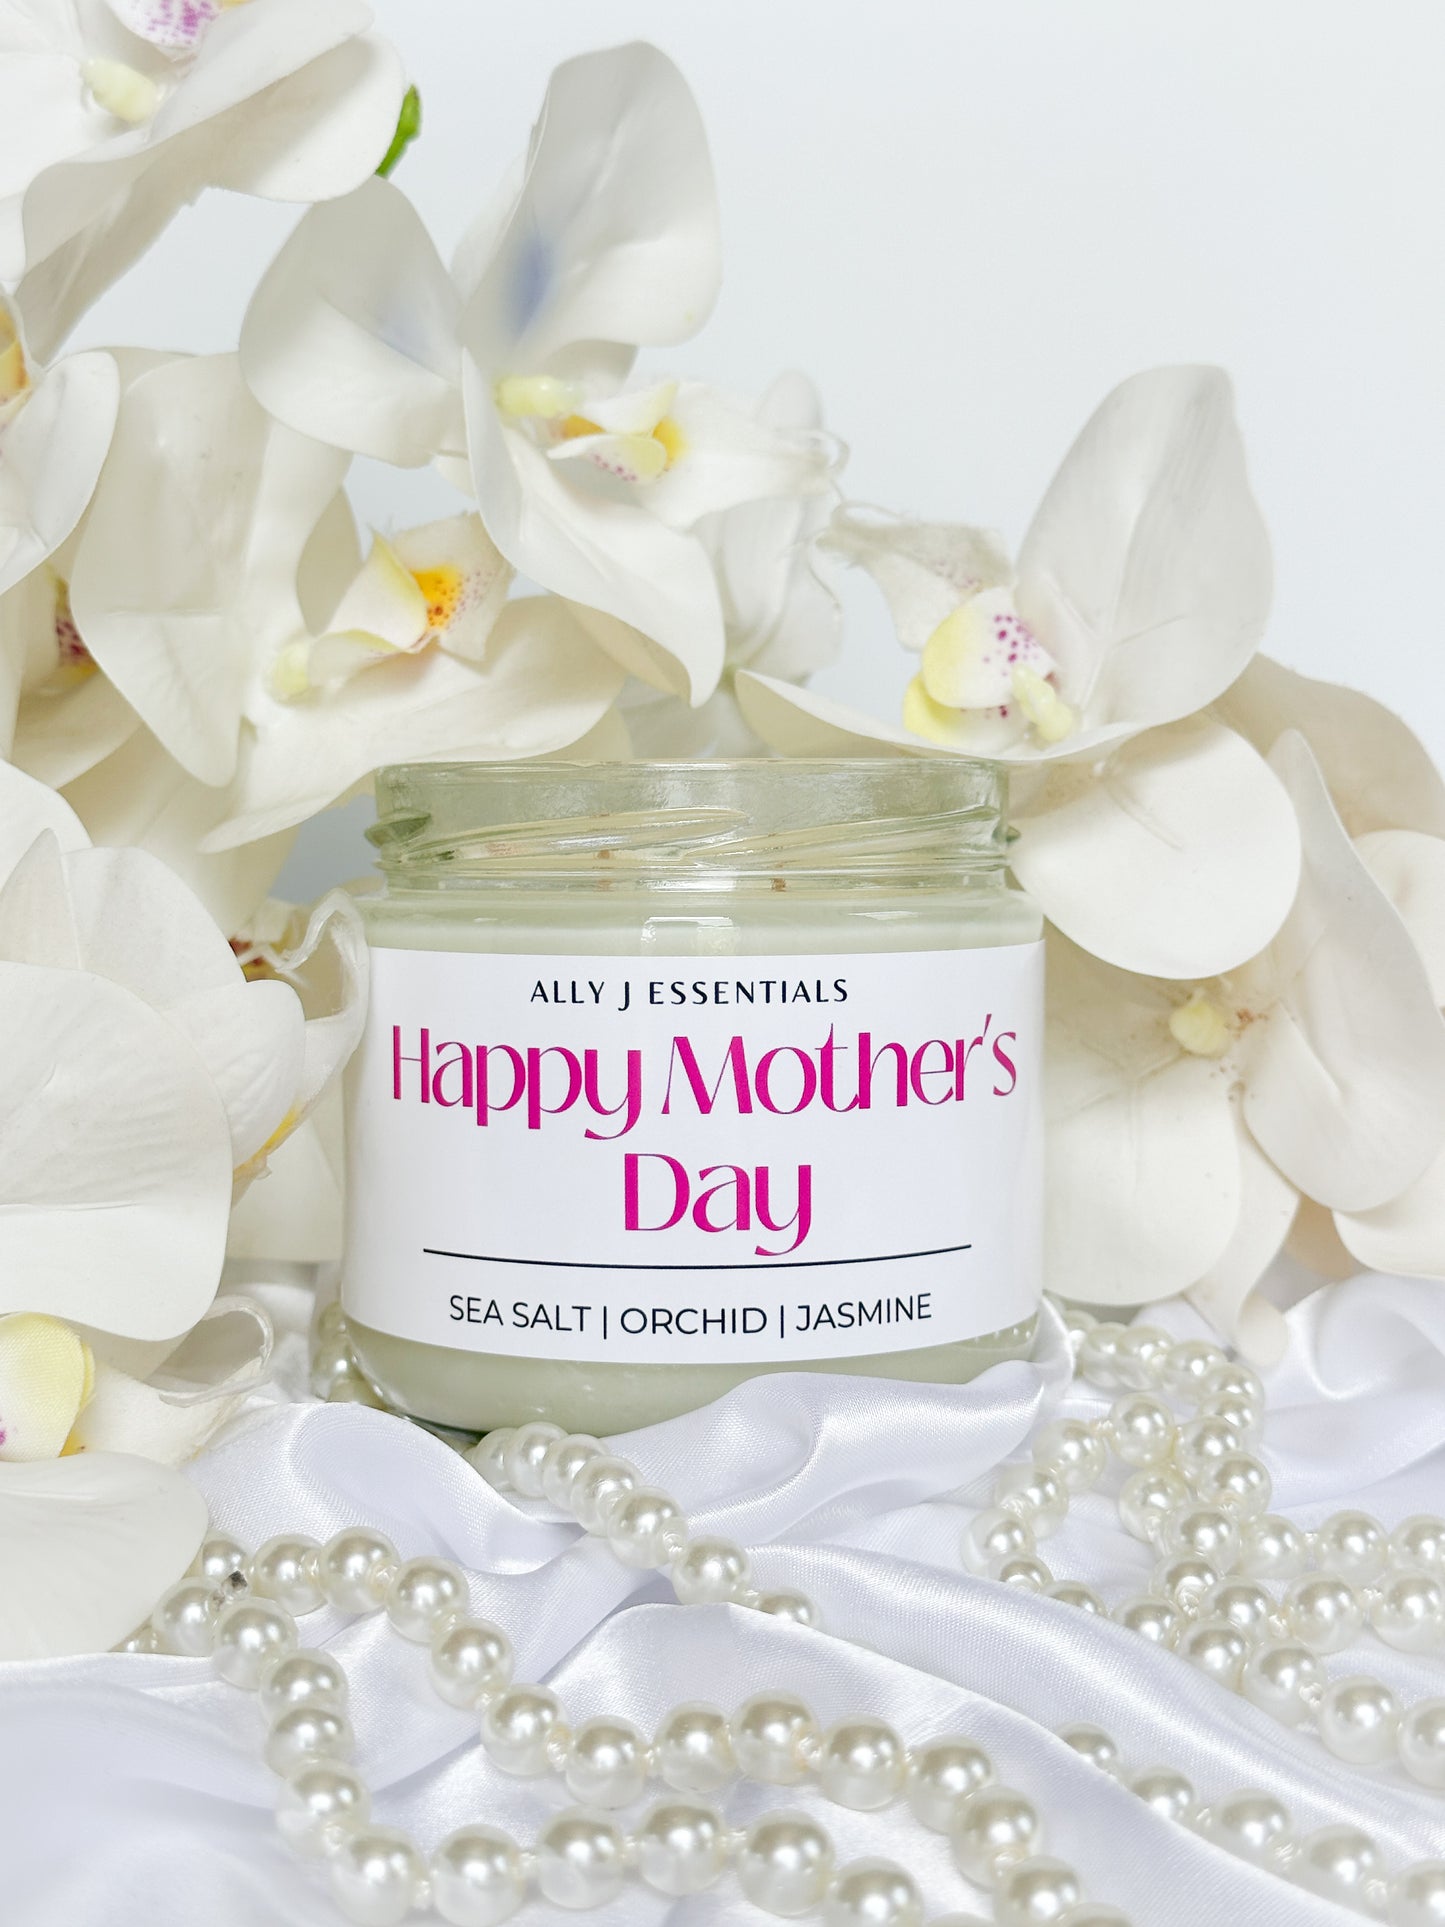 MOTHER'S DAY LIMITED EDITION GIFT SET